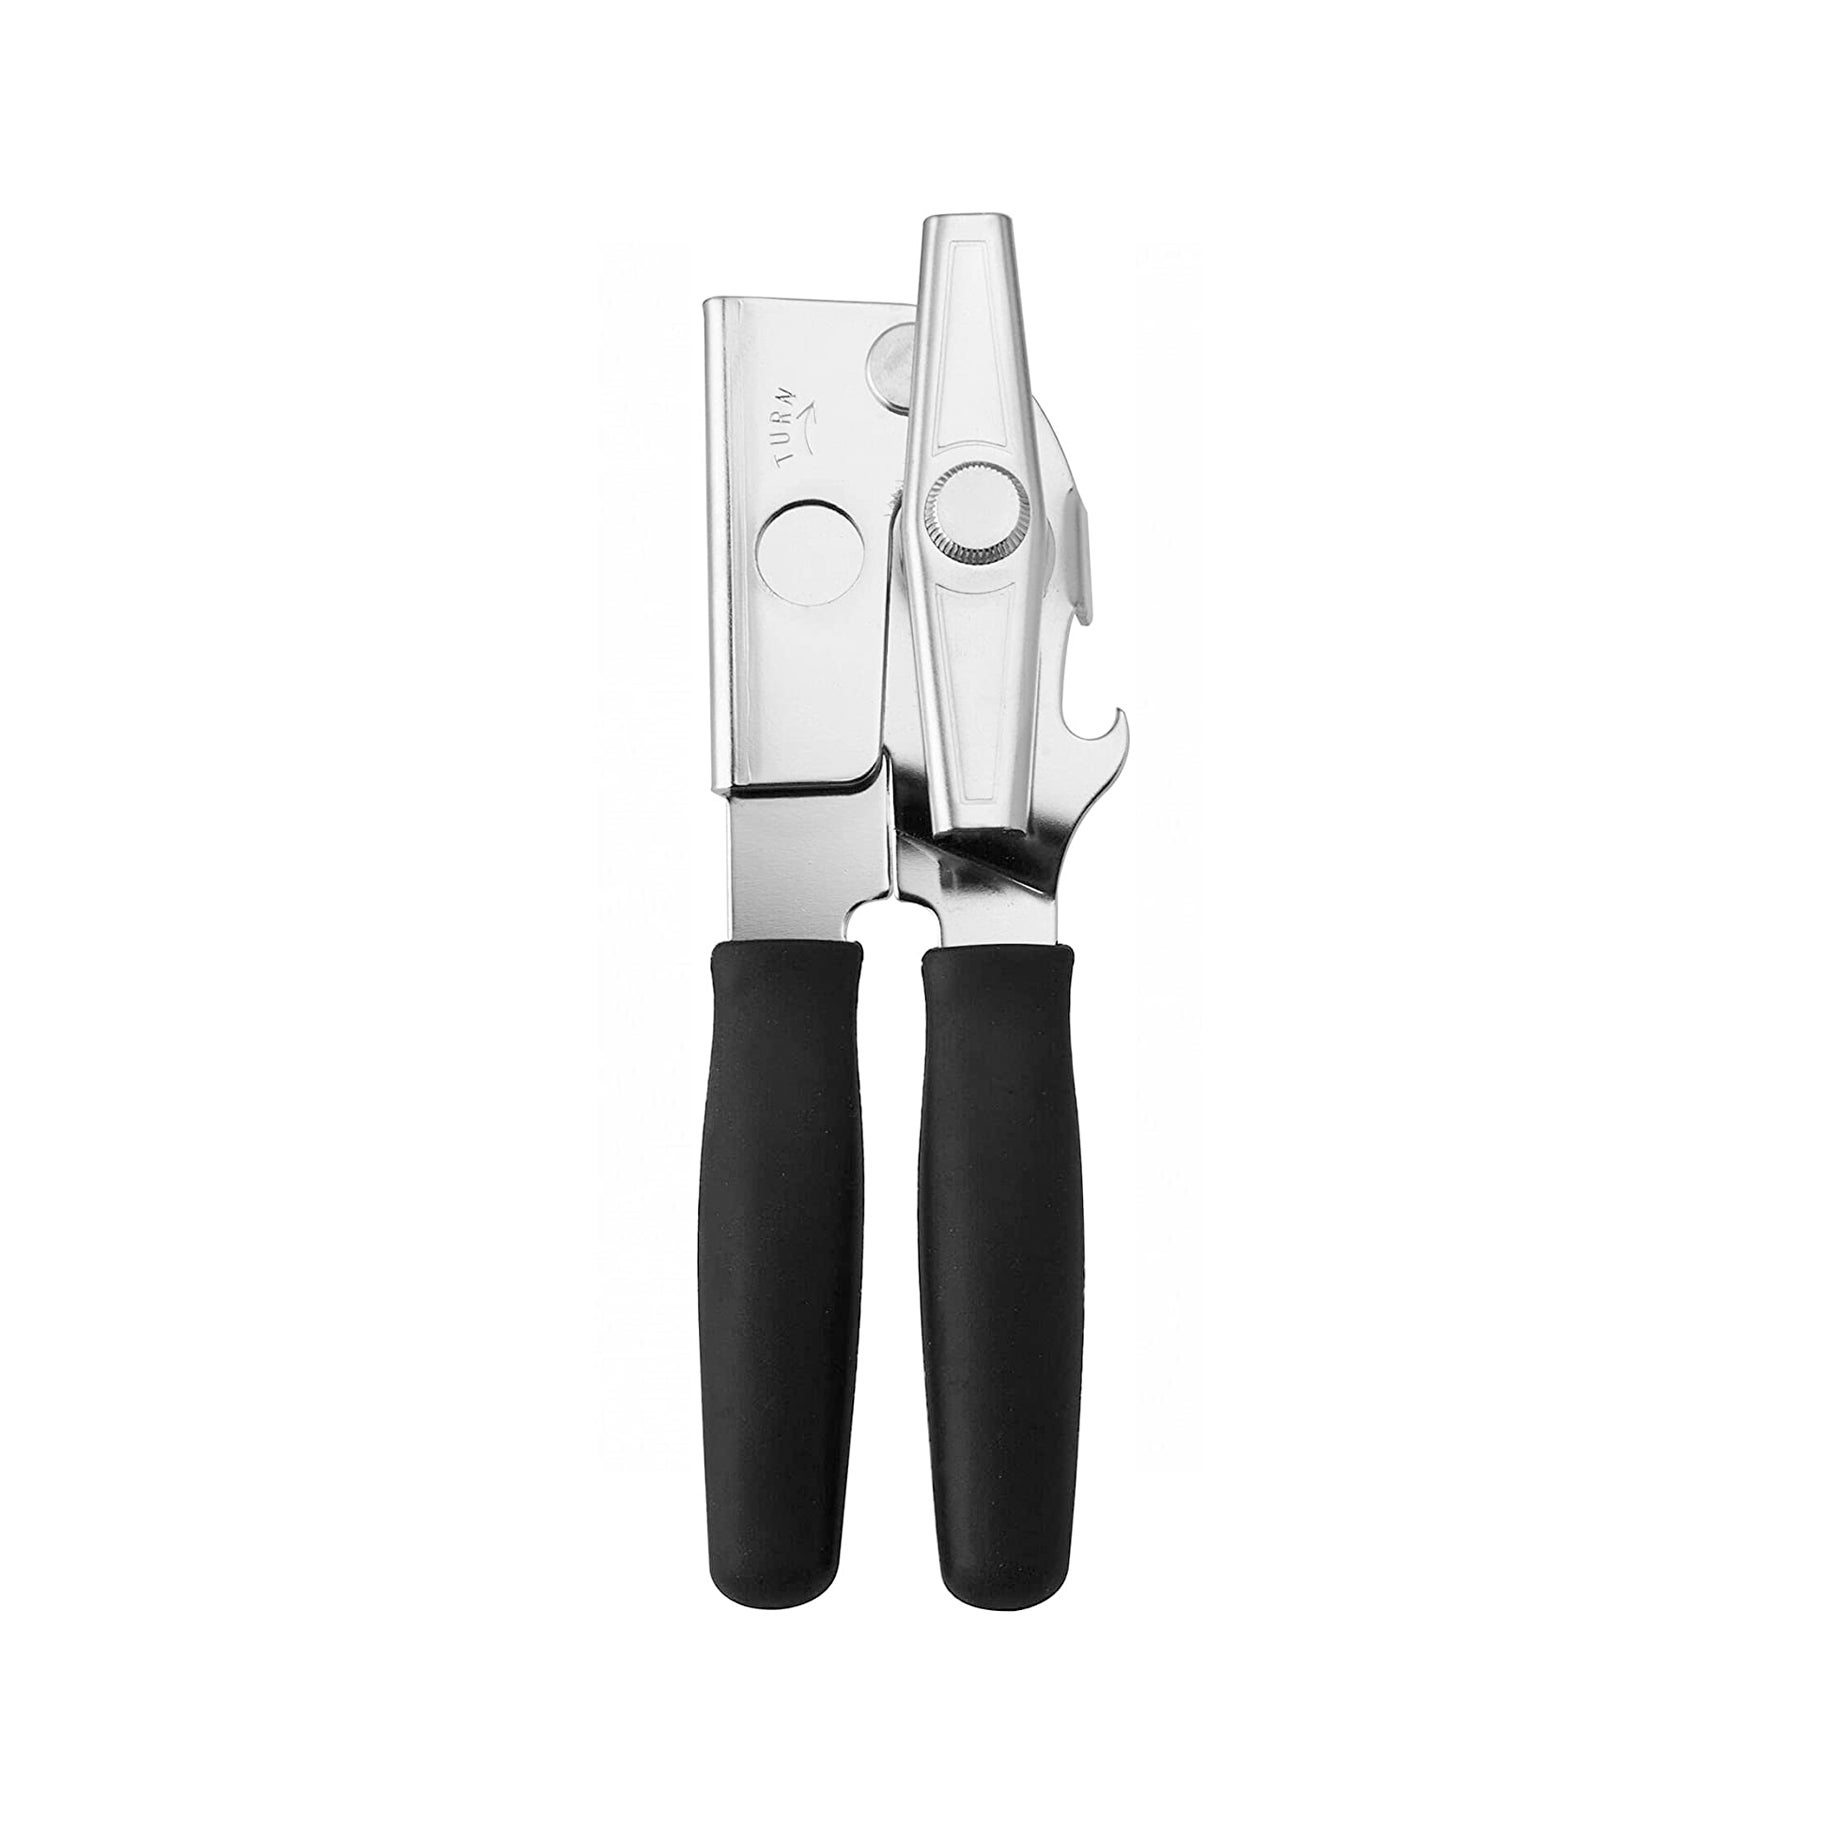 Small Hand Held Manual Can Opener 3.5-Inch Long